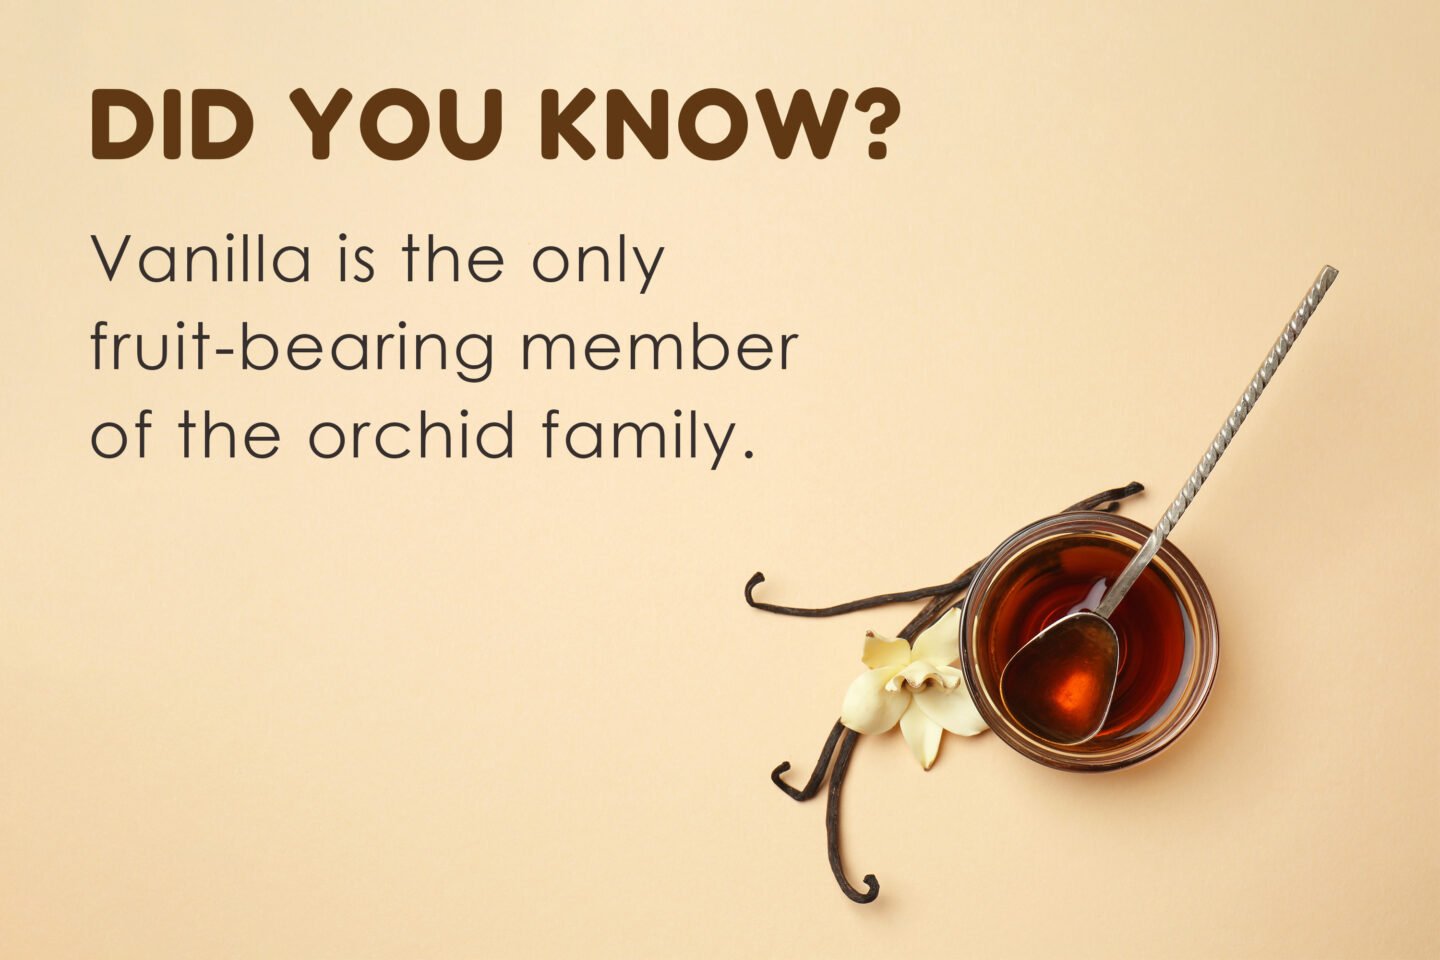 did you know vanilla fruit bearing orchid